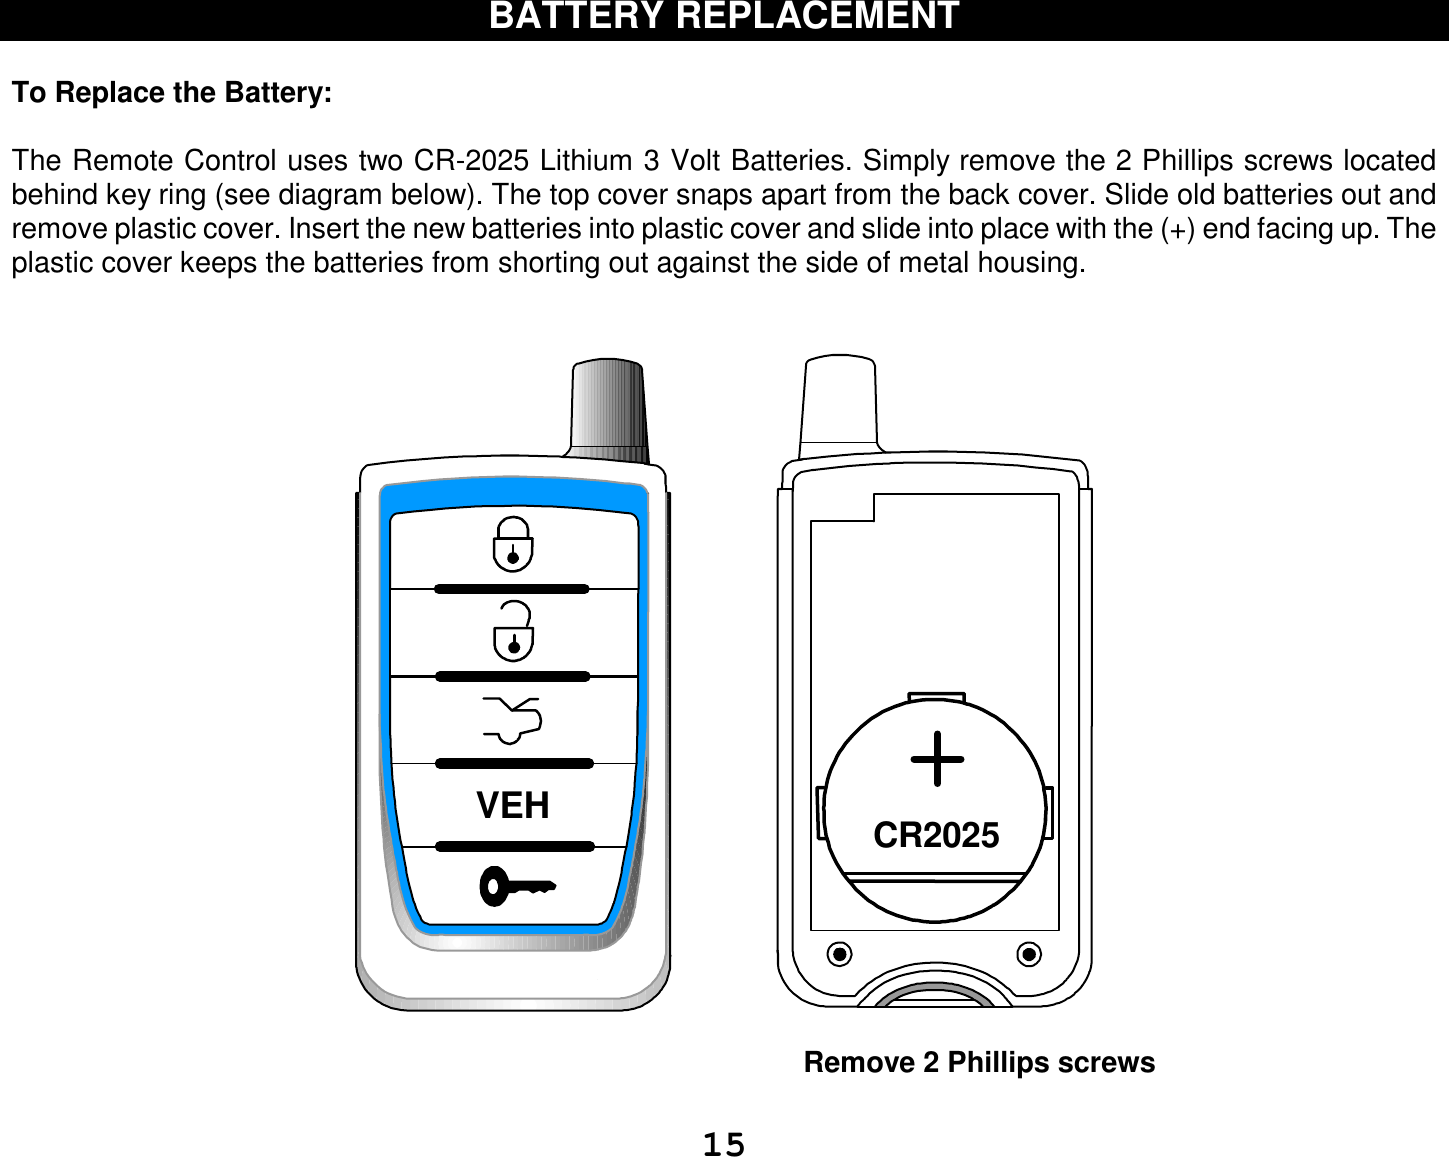  15 BATTERY REPLACEMENT  To Replace the Battery:   The Remote Control uses two CR-2025 Lithium 3 Volt Batteries. Simply remove the 2 Phillips screws located behind key ring (see diagram below). The top cover snaps apart from the back cover. Slide old batteries out and remove plastic cover. Insert the new batteries into plastic cover and slide into place with the (+) end facing up. The plastic cover keeps the batteries from shorting out against the side of metal housing.   CR2025VEH                                                                  Remove 2 Phillips screws  